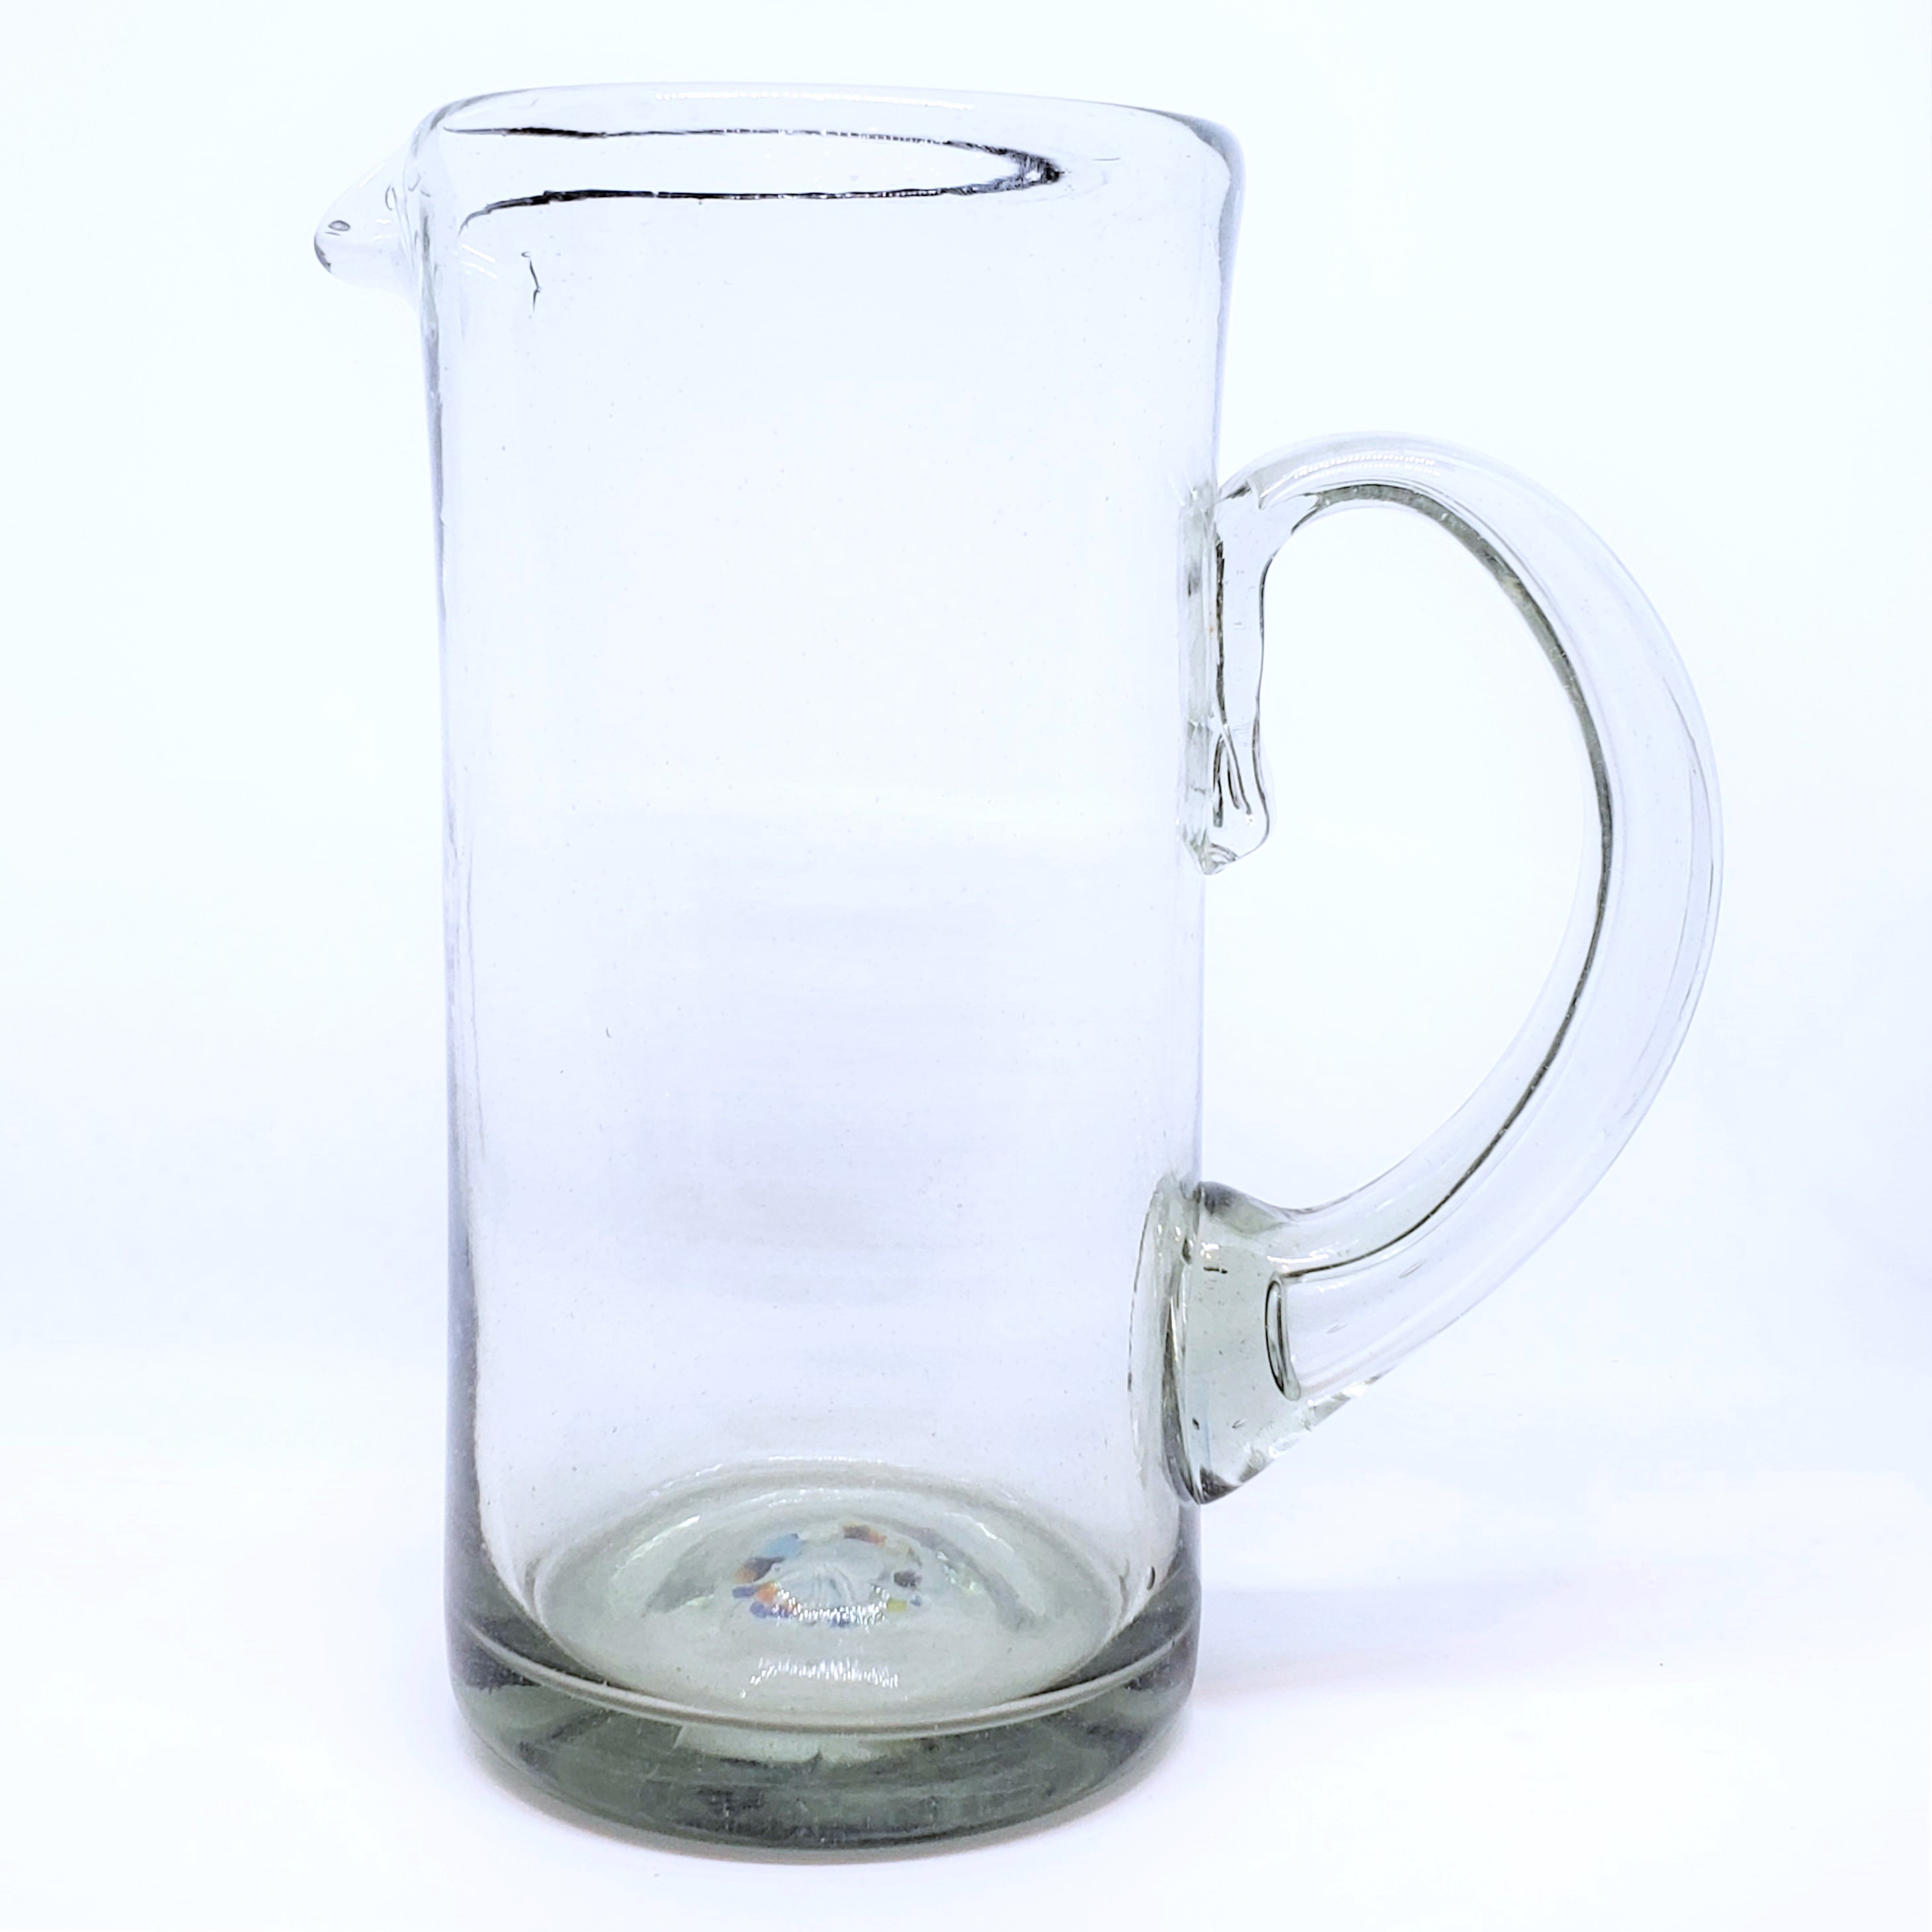 New Items / Clear 48 oz Tall Pitcher / Match your clear tumblers and glasses with this gorgeous rustic clear tall pitcher.